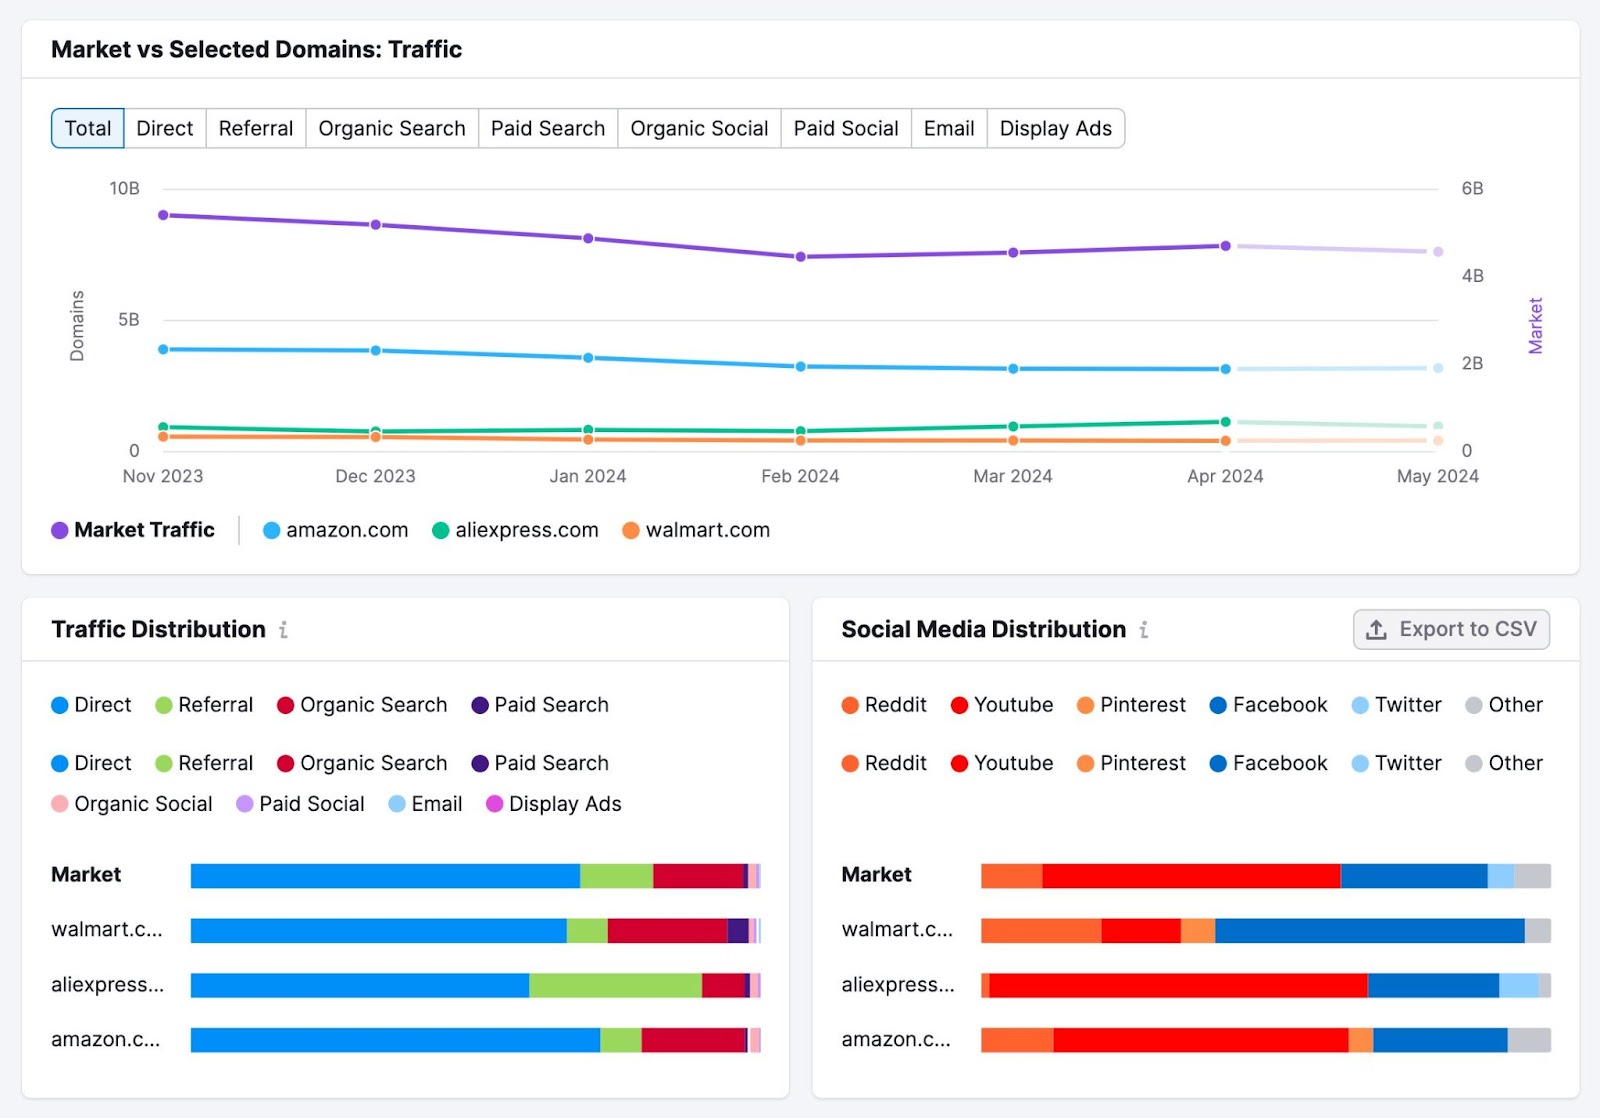 Semrush’s "Market Explorer" showing a breakdown of traffic and social media distribution by source for selected competitors.